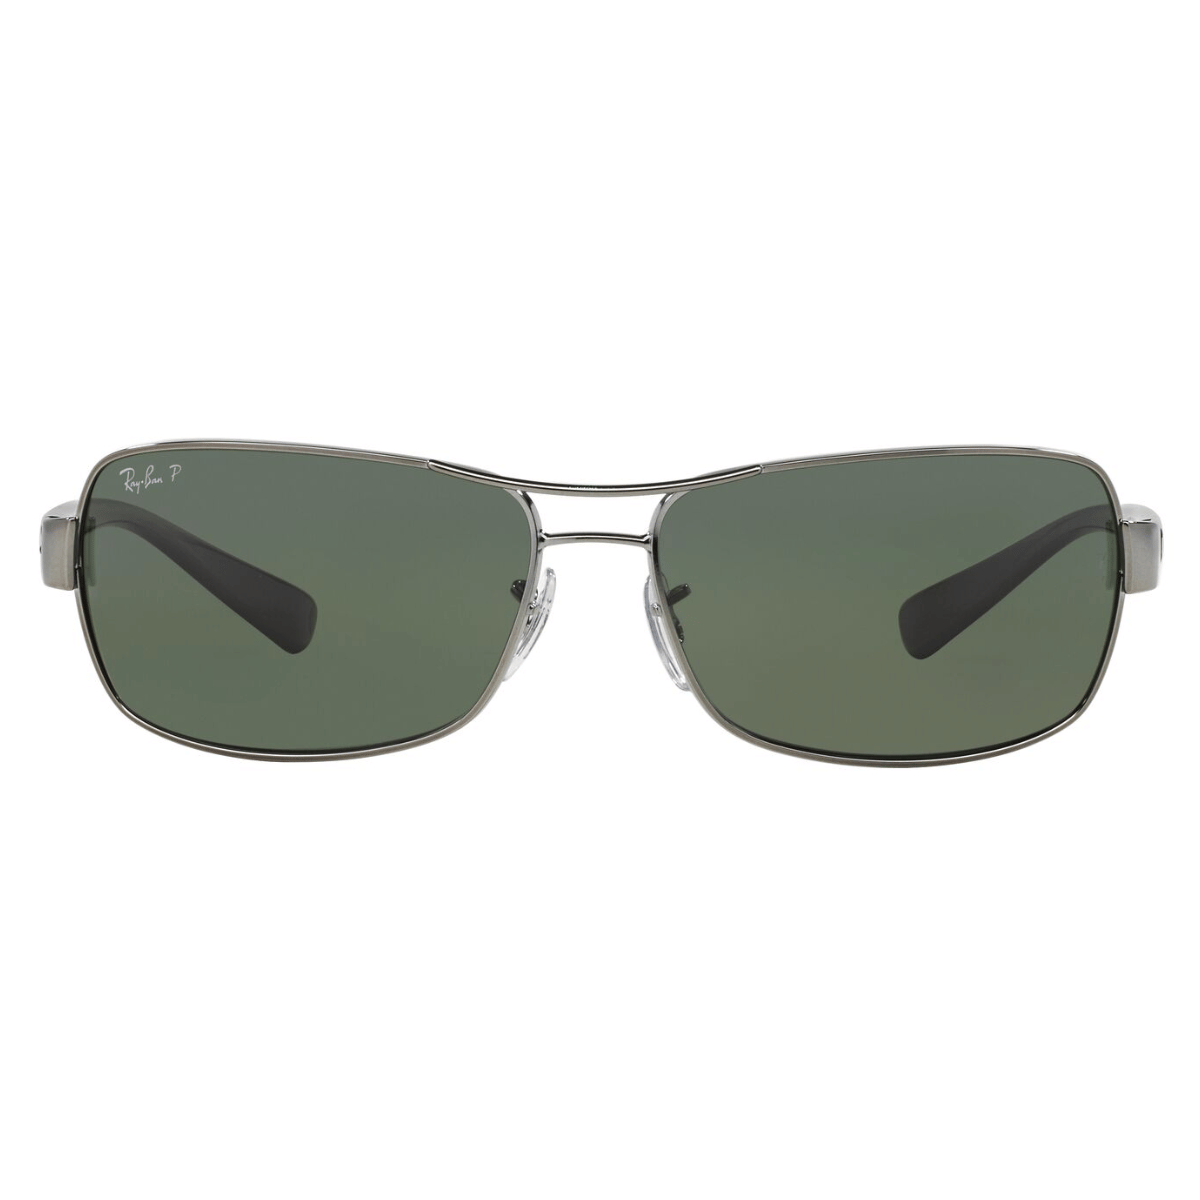 "Ray-Ban 3379 rectangular sunglasses in gunmetal with polarized green lenses, offering stylish protection, available at Optorium."